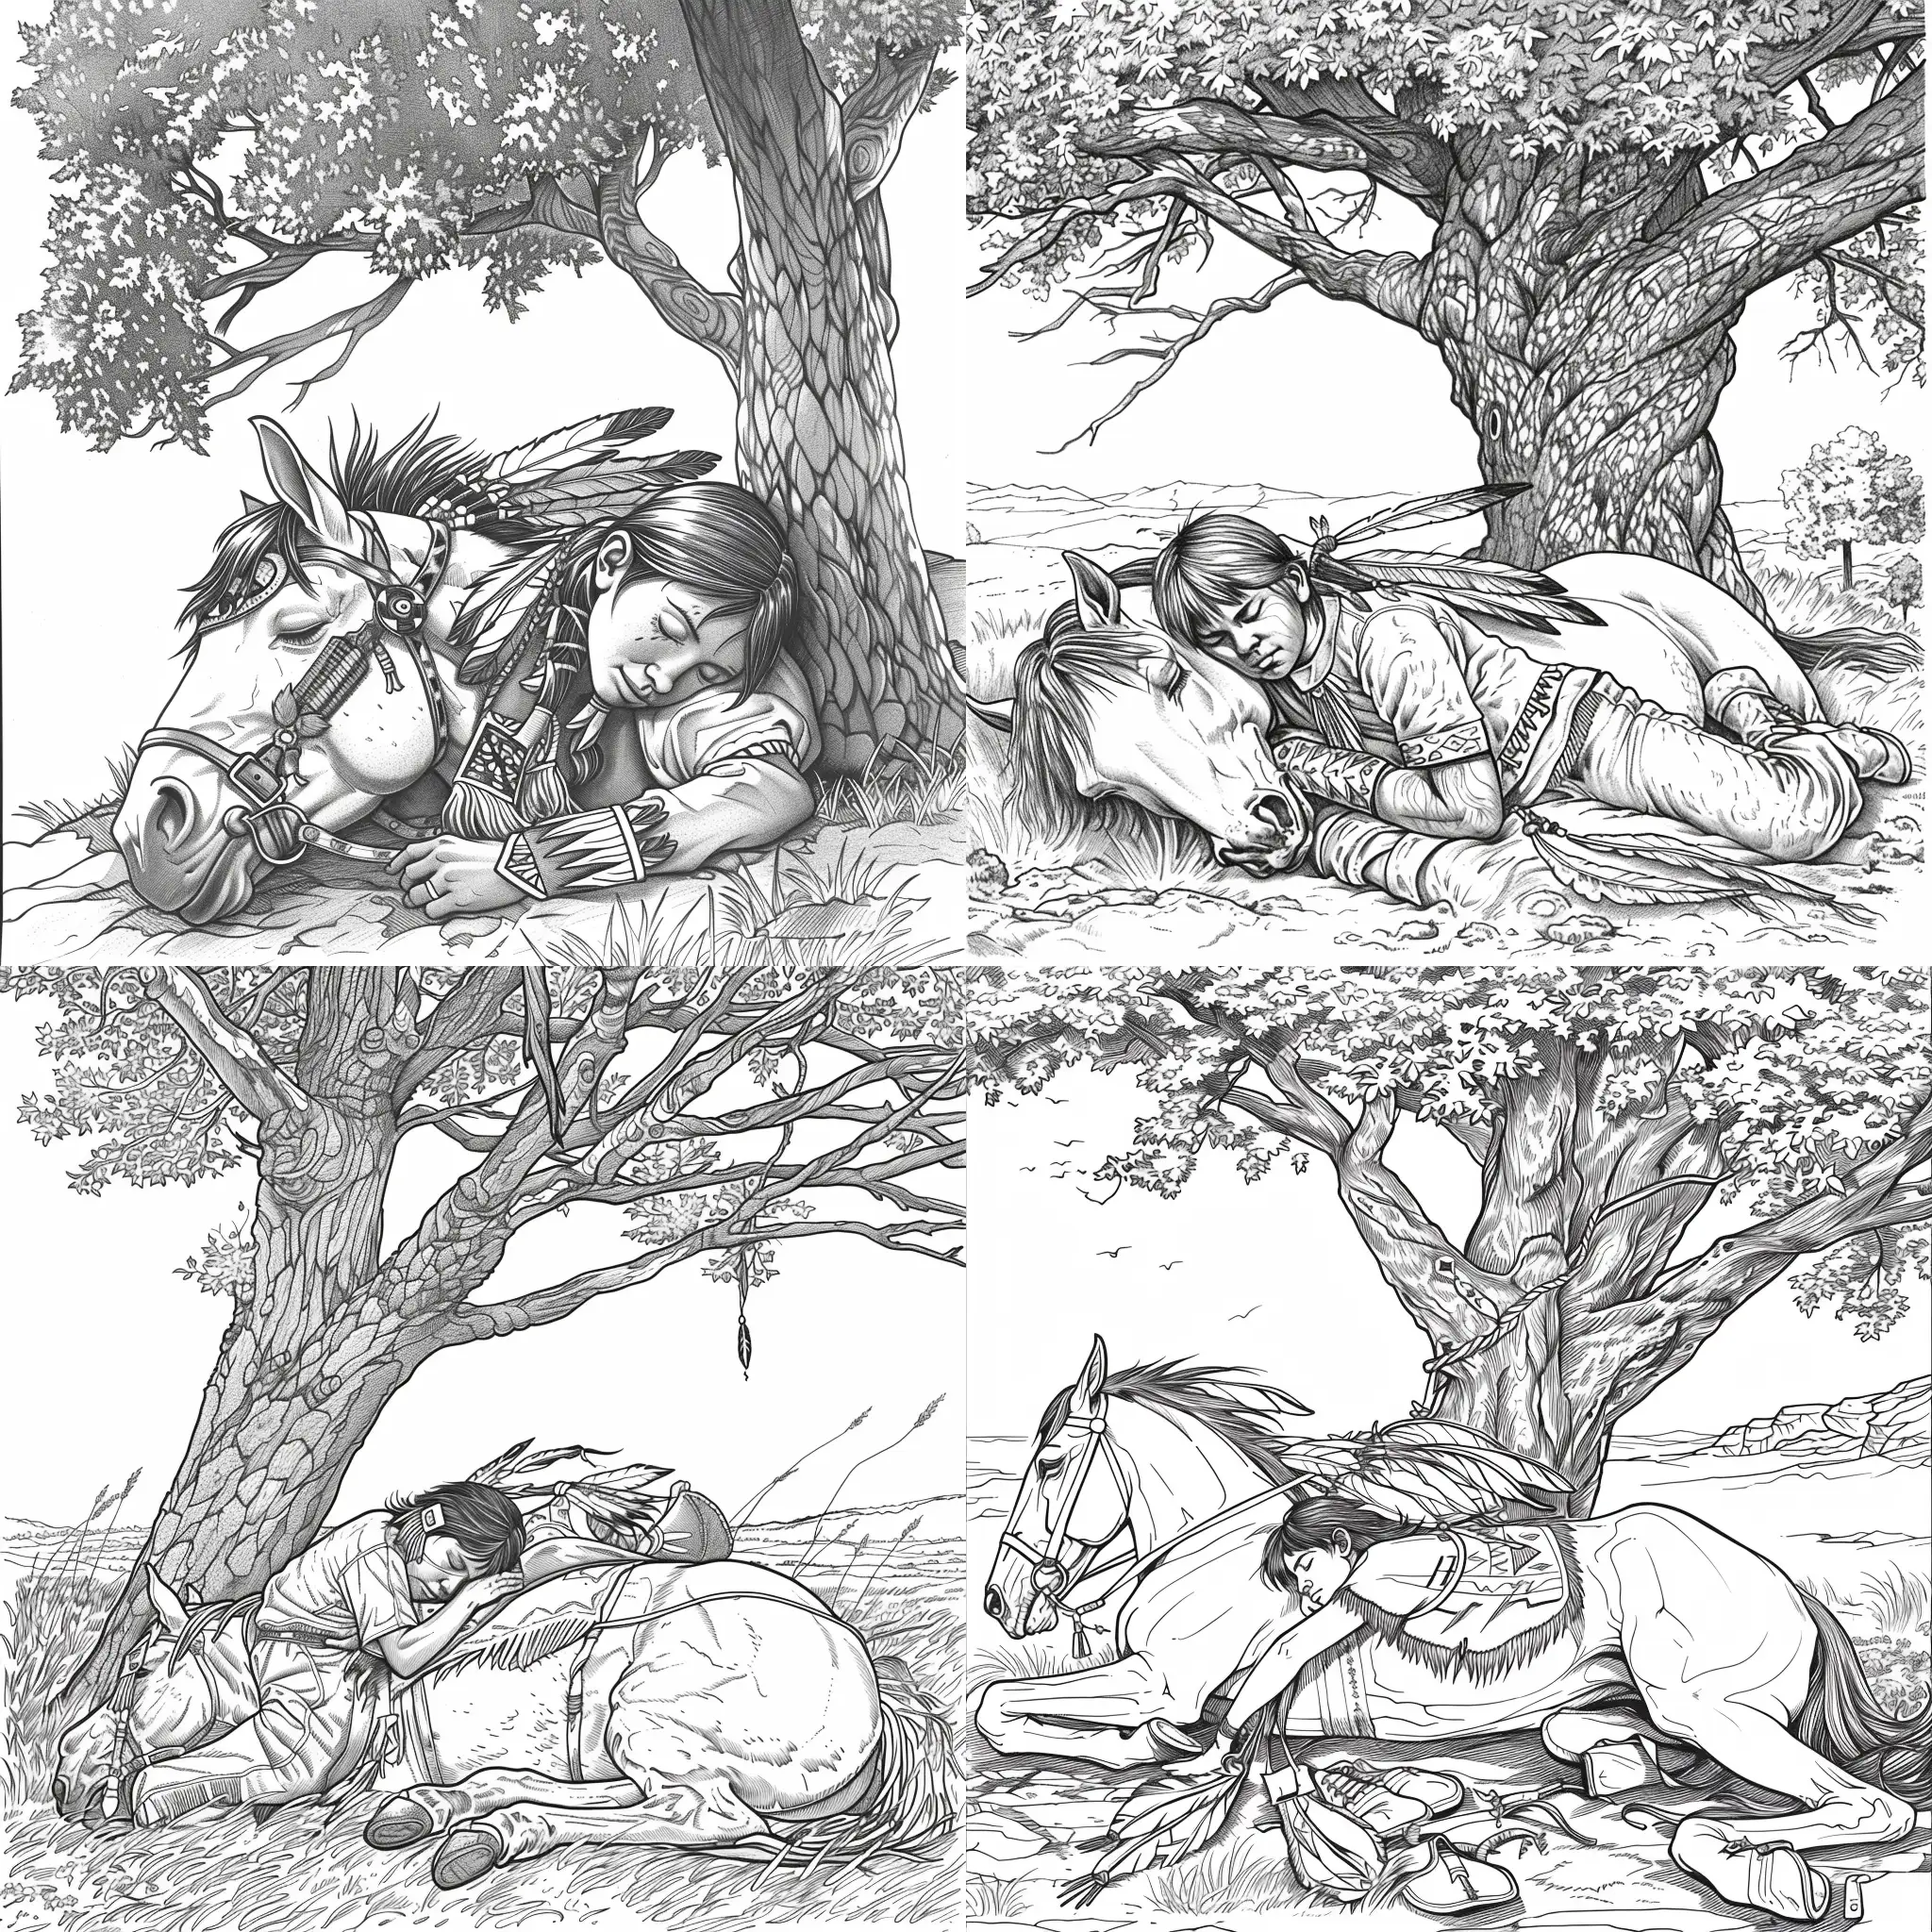 Serene-Native-American-Boy-Napping-on-Horses-Neck-Coloring-Book-Illustration